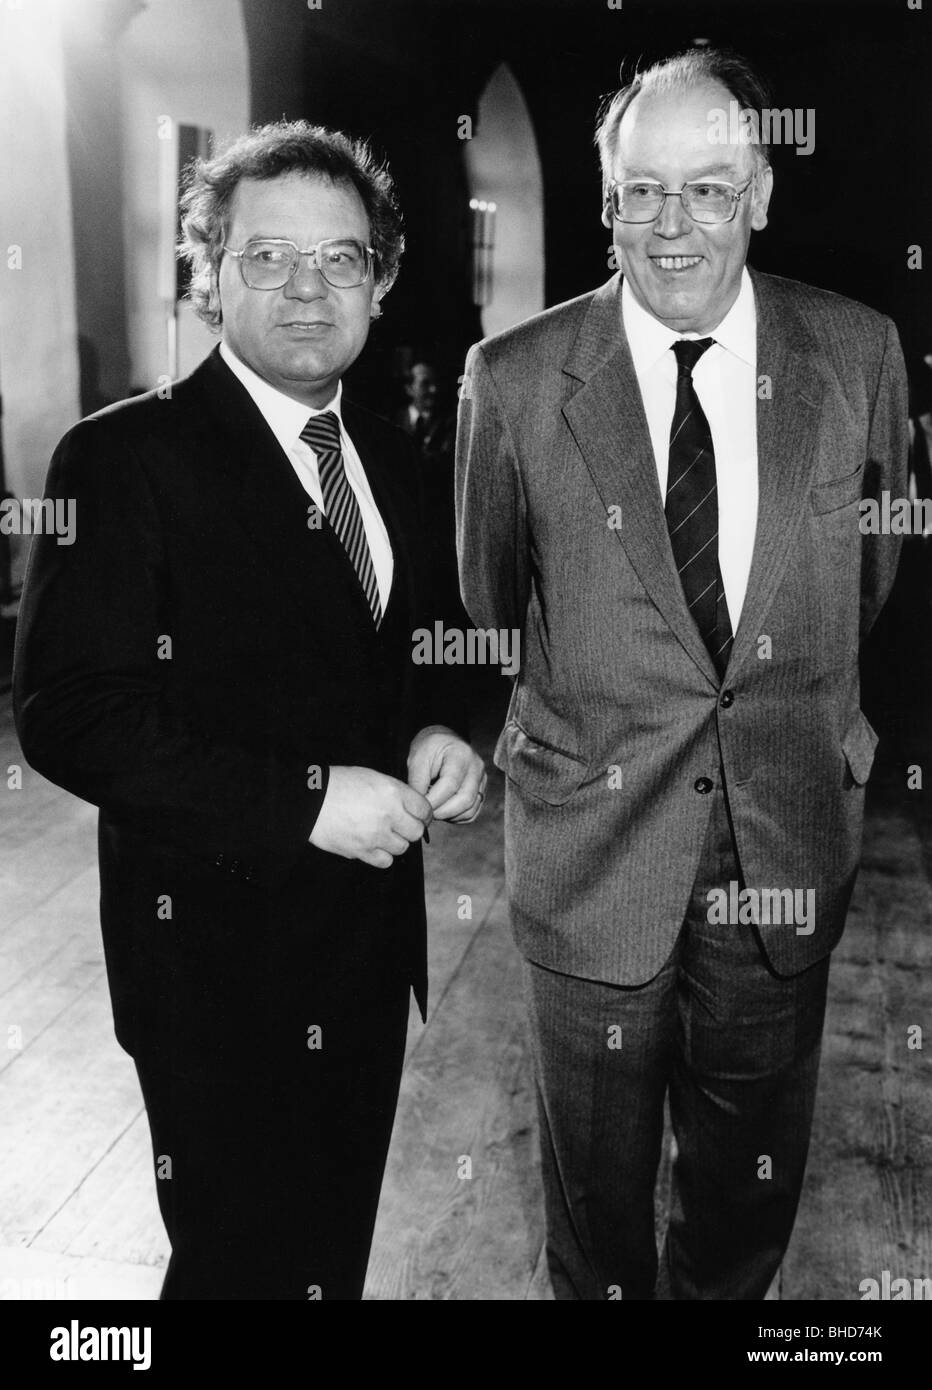 Brunner, Manfred, * 31.7.1947, German politician, chairman of the FDP in Bavaria 1983 - 1989, with Josef Ertl, during the event '40 Years FDP in Bavaria', Nuremberg, 2.5.1986, Stock Photo